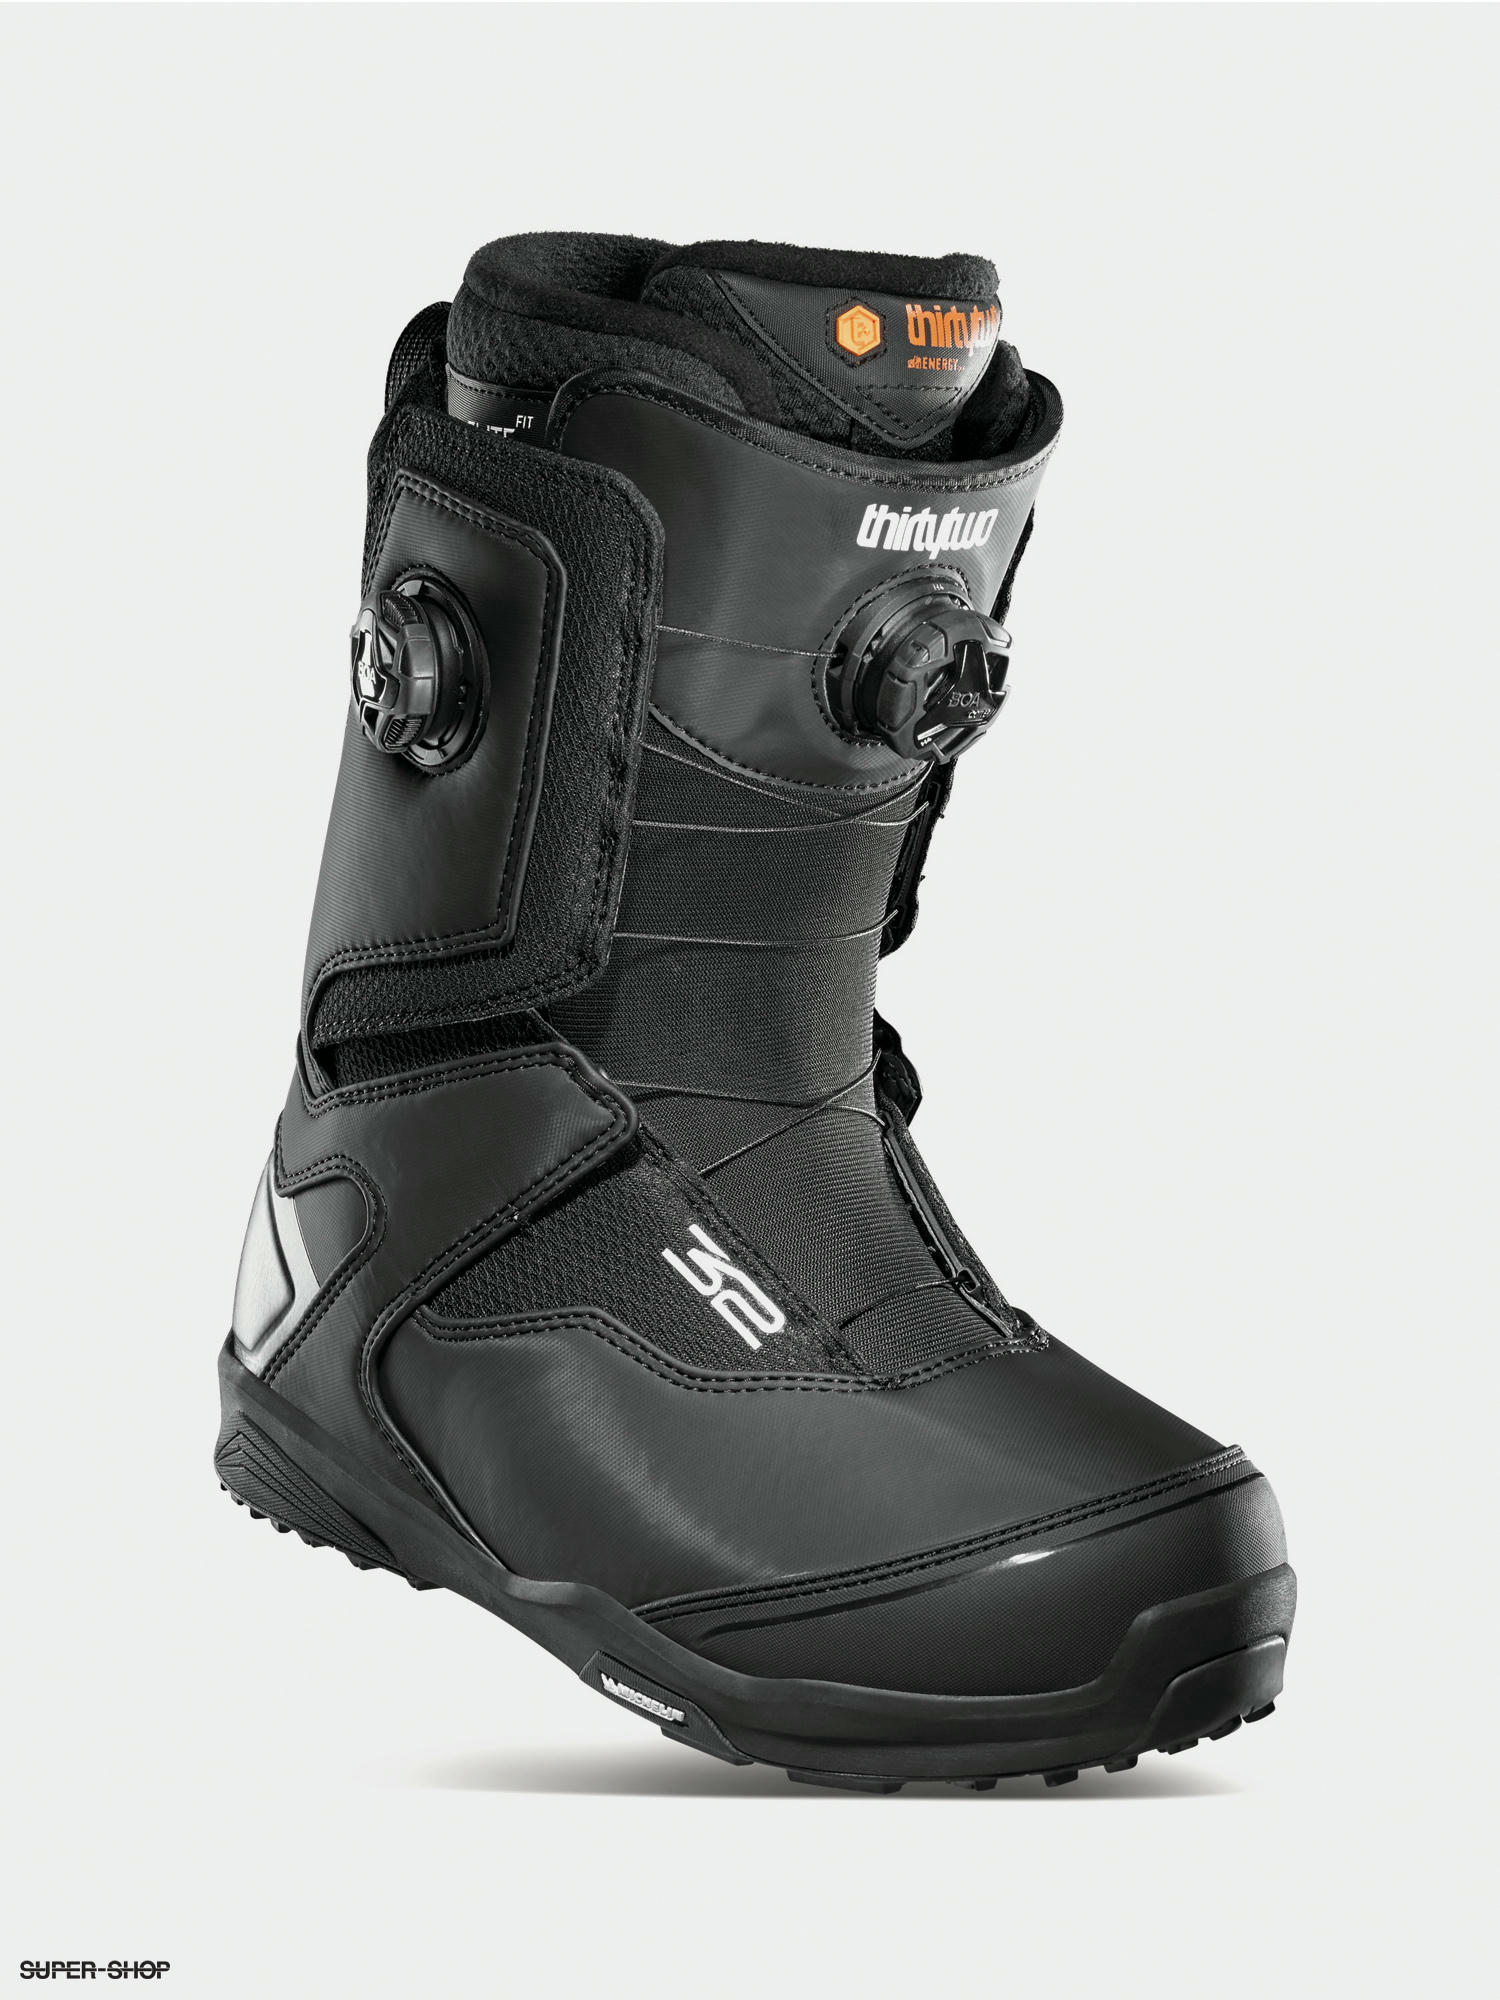 thirtytwo binary boa snowboard boots 2017 review